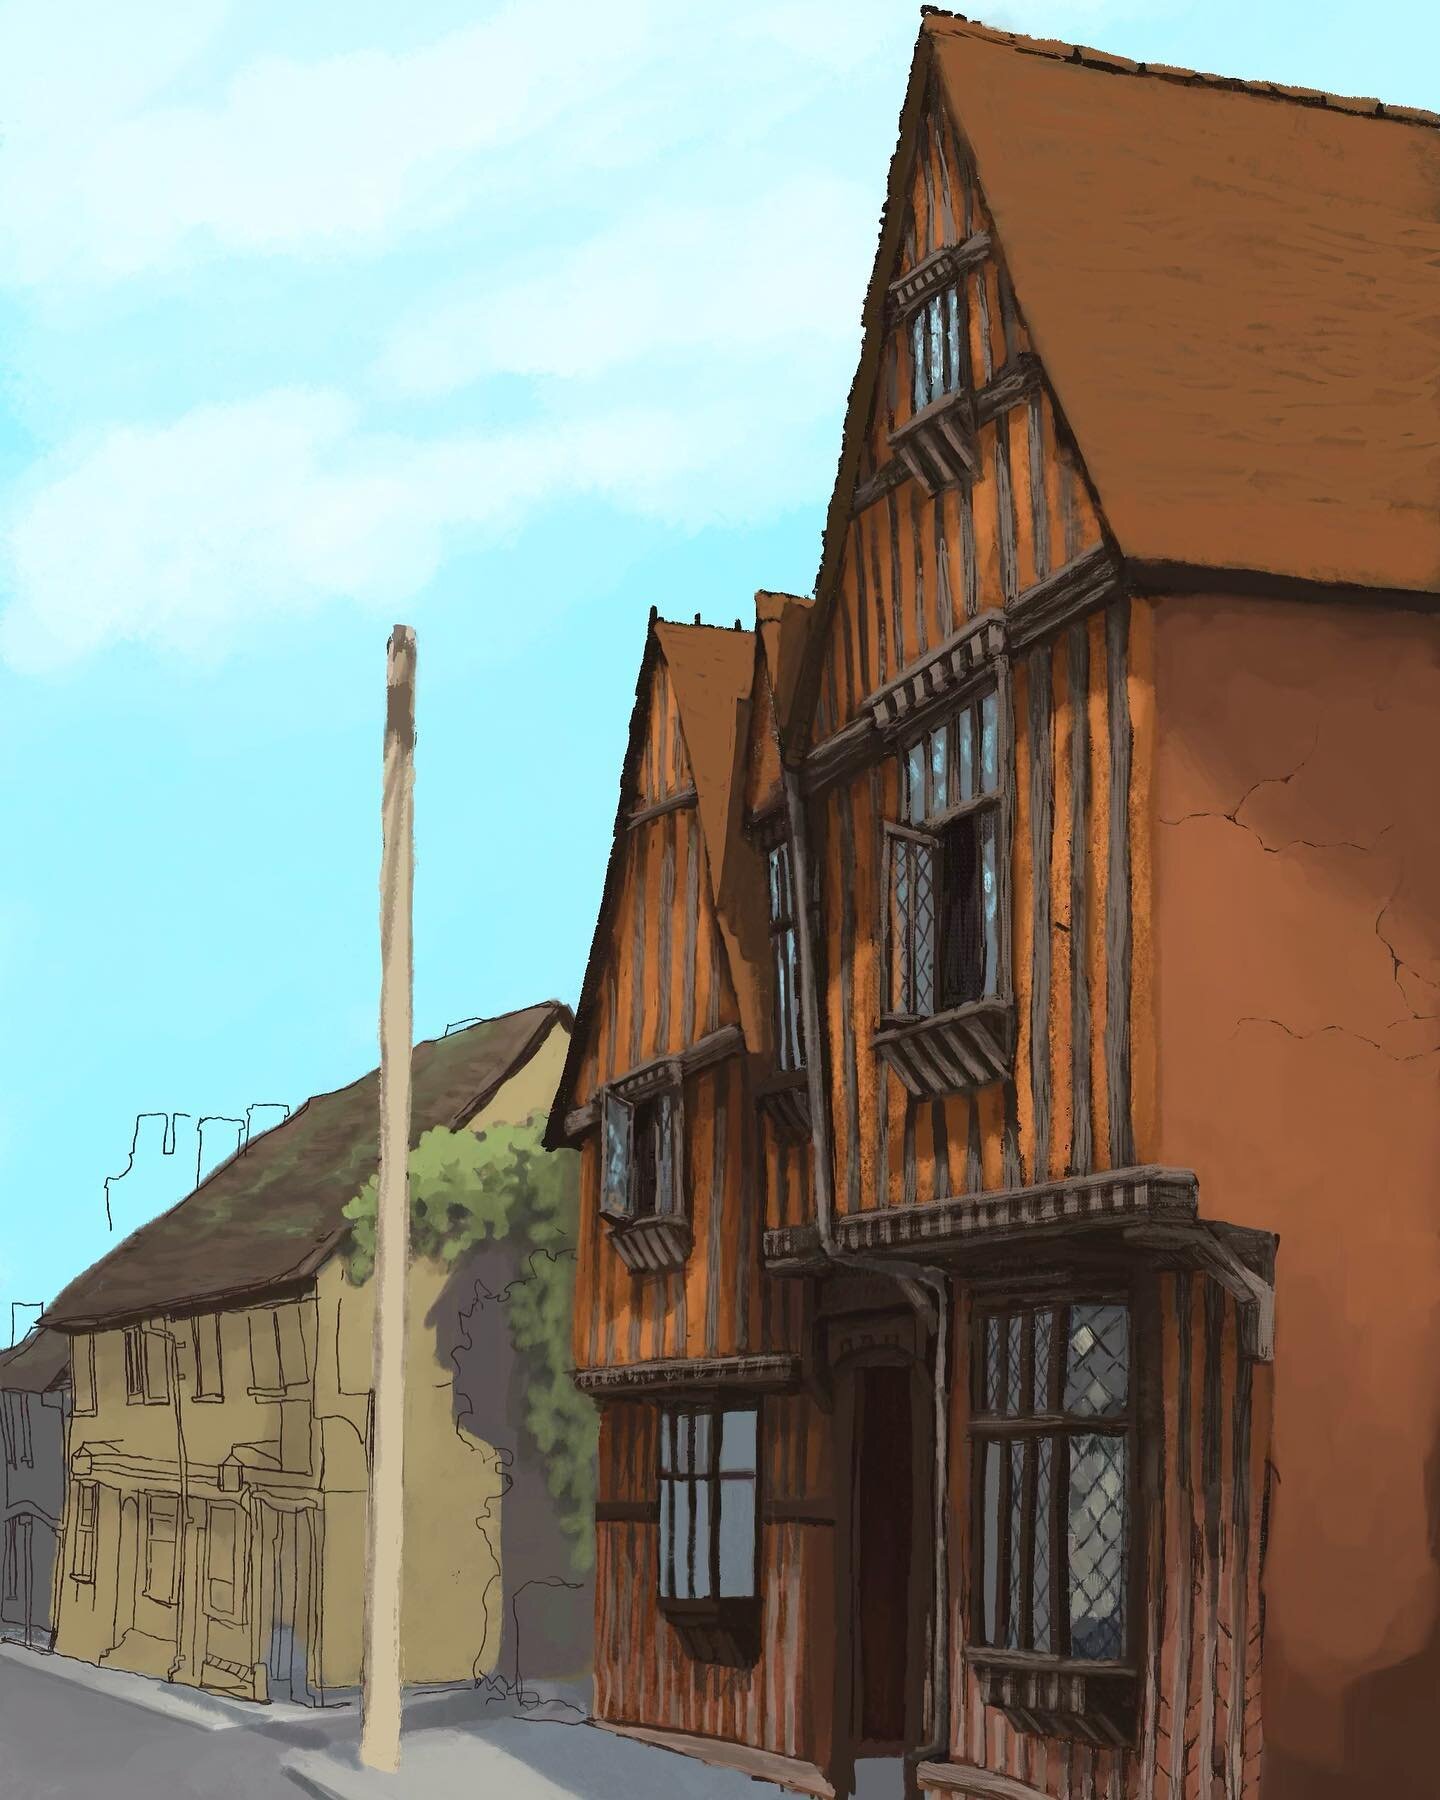 Work in progress 🇬🇧 Lavenham in Suffolk. (Based on a view of Water St, with the @officialdeverehouse in the foreground.) It&rsquo;s grey, rainy in Baltimore- maybe that&rsquo;s what reminded me of the visit to England back in 2013? 😉Where&rsquo;s 